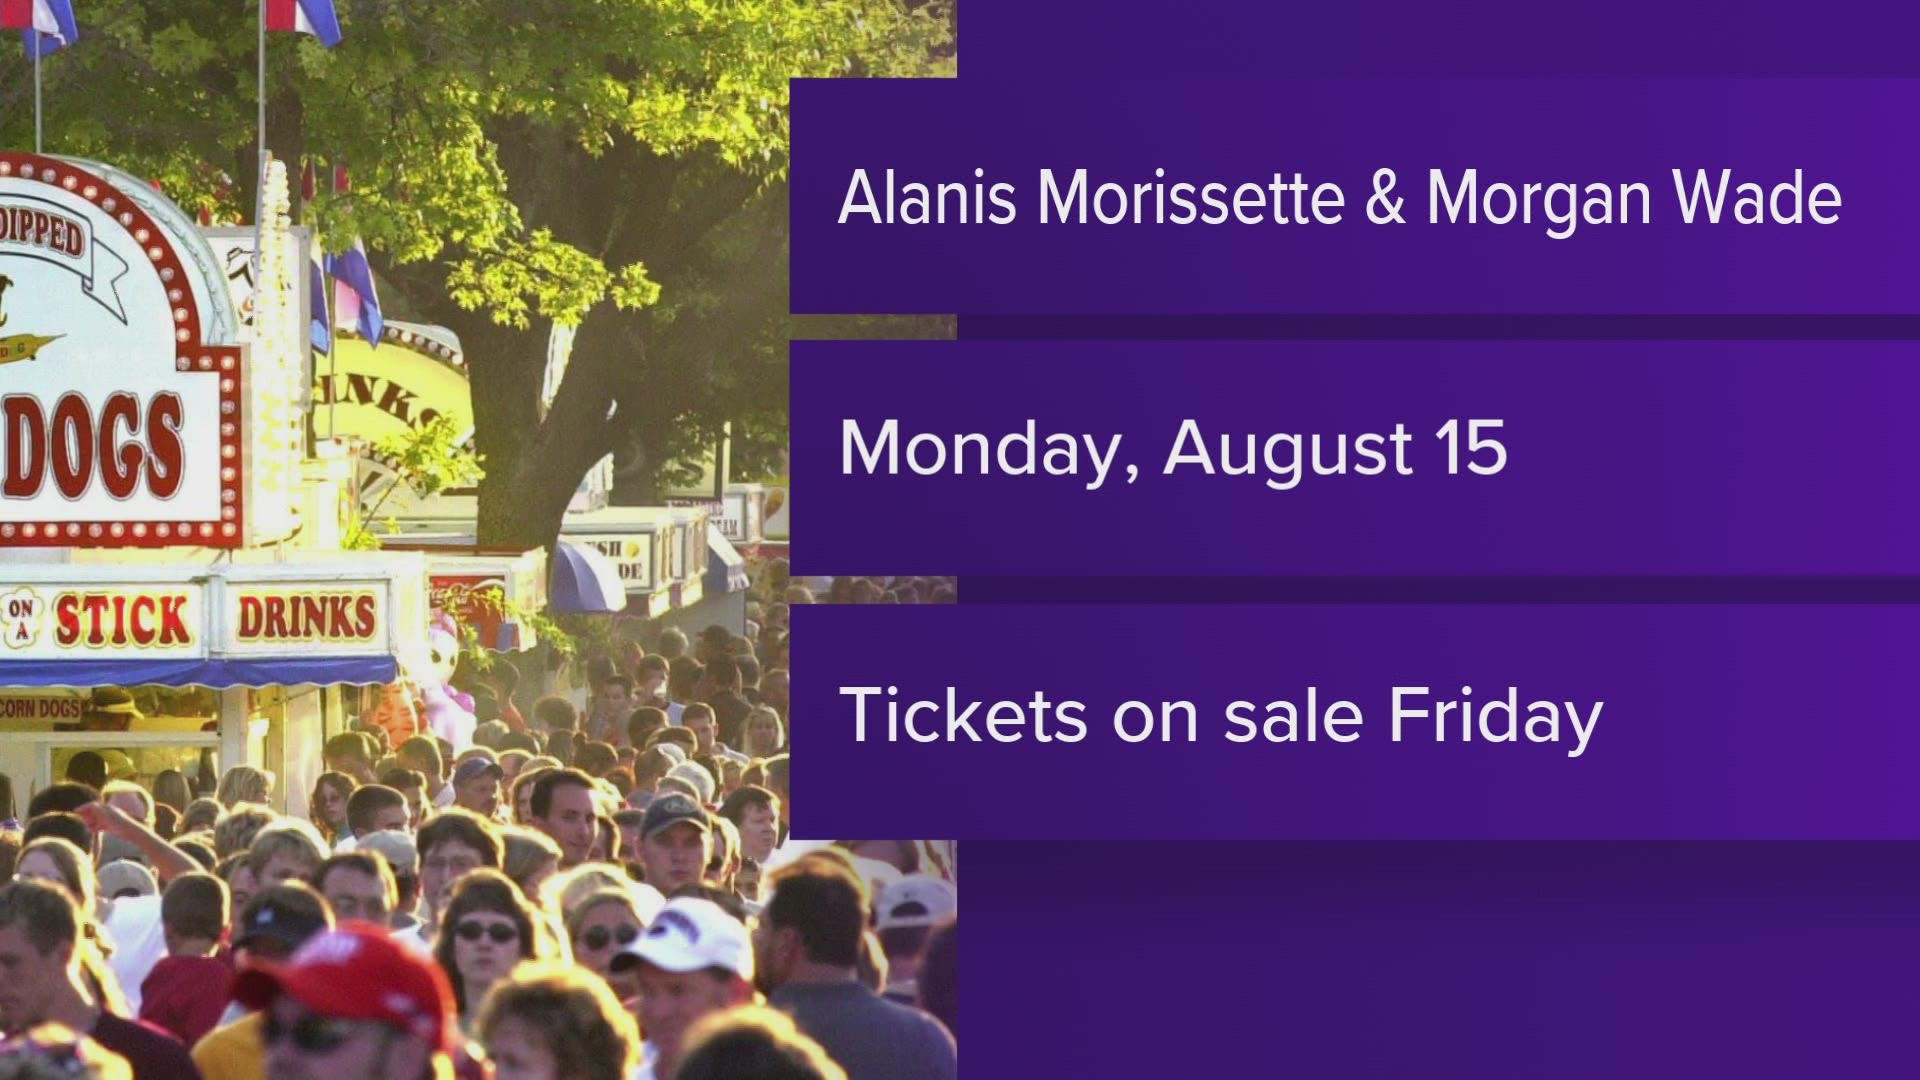 Alanis Morissette is the latest performer announced to play this year's Iowa State Fair. Tickets go on sale at 10 a.m. Friday.